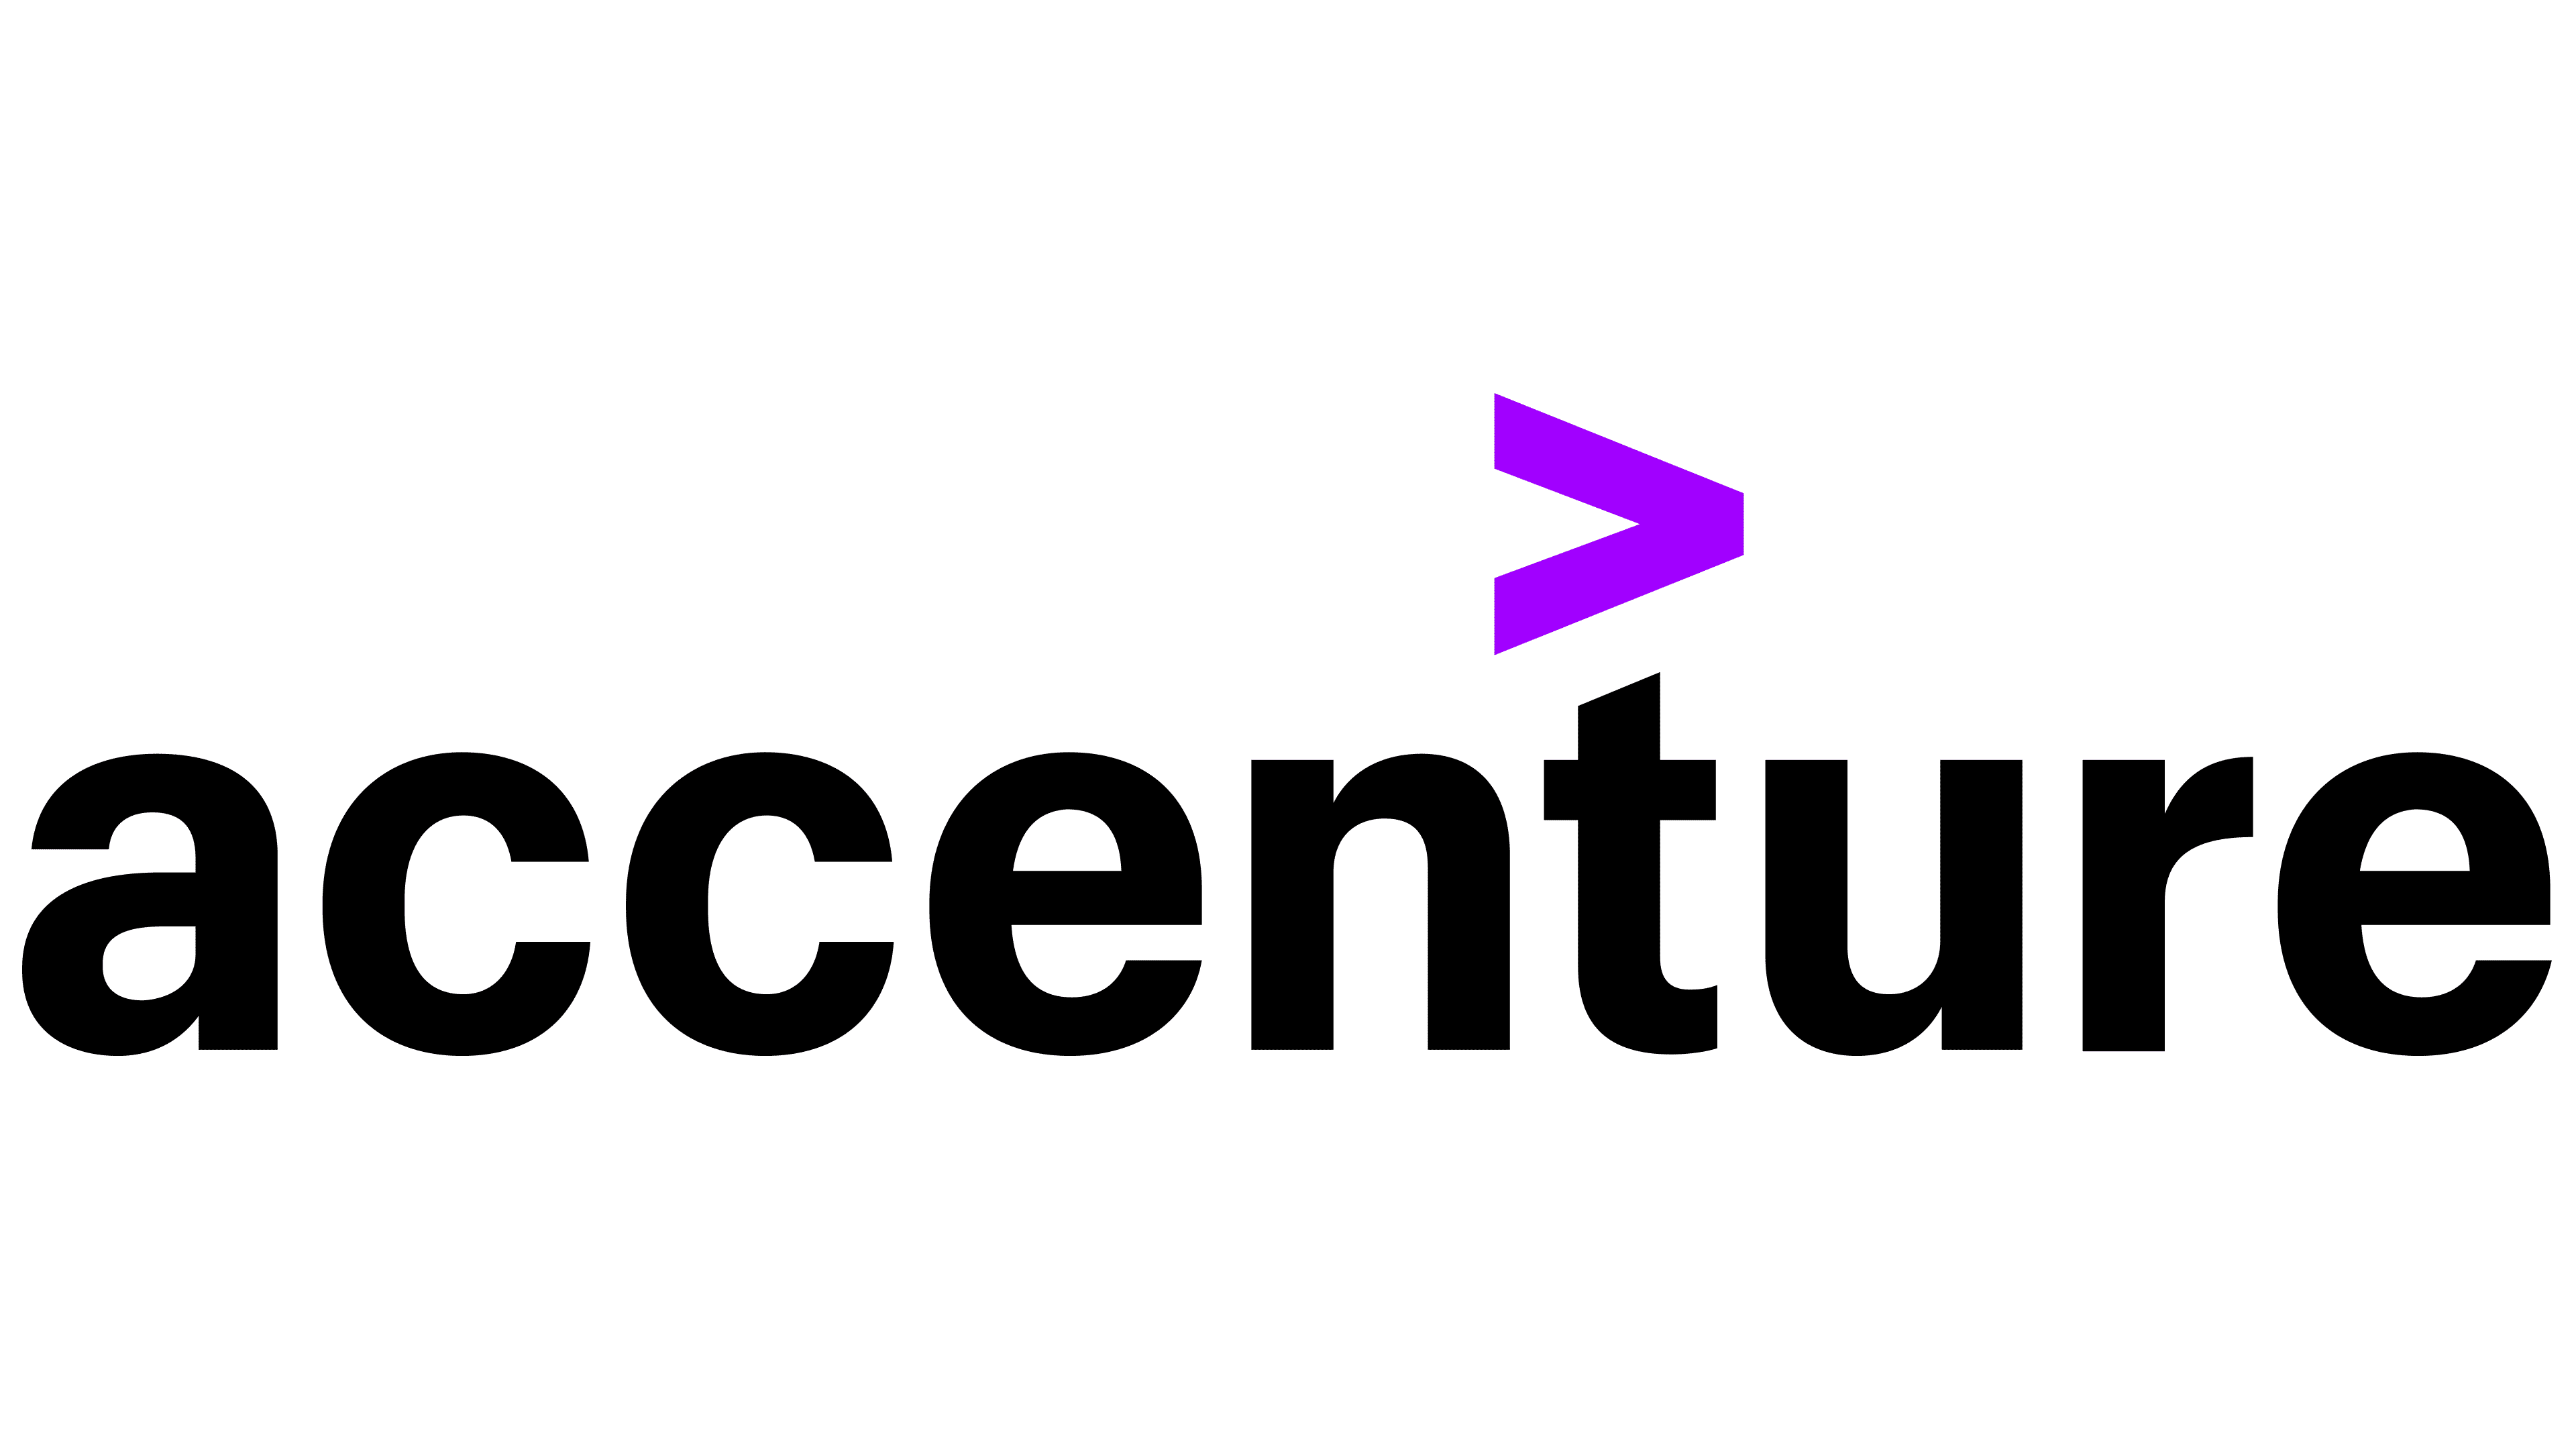 Accenture Logo | The most famous brands and company logos in the world